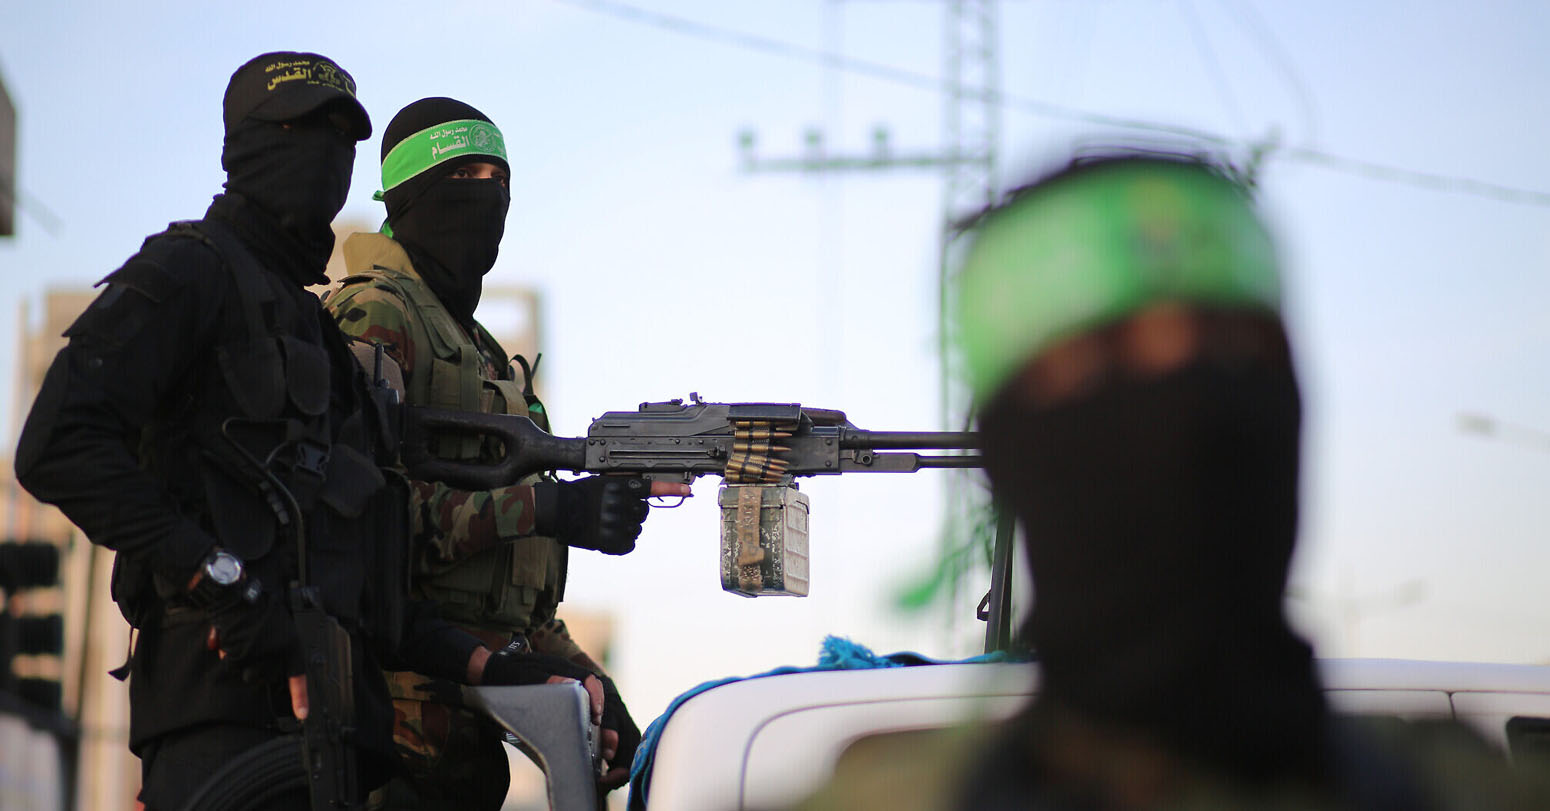 “Sliver Of Hope” As Hamas Releases 2 Hostages, But Gaza Aid Remains Stalled